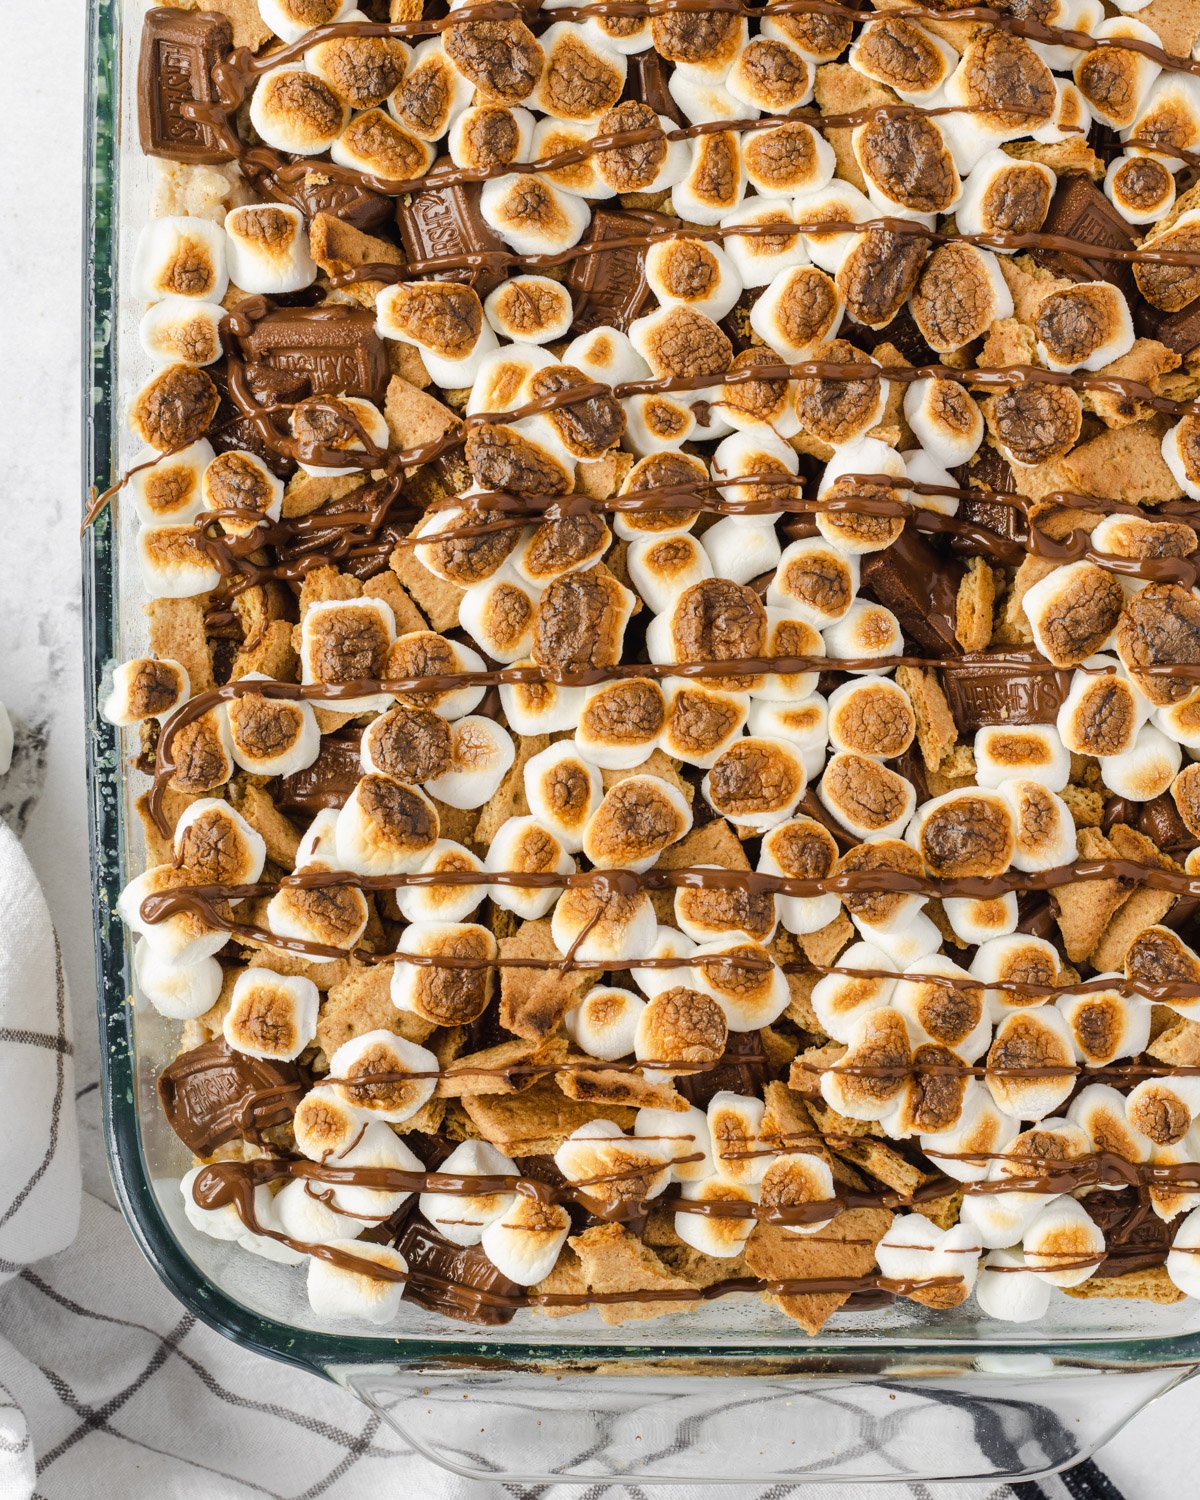 Close up of the pan, showing toasted marshmallows on top of the bars.